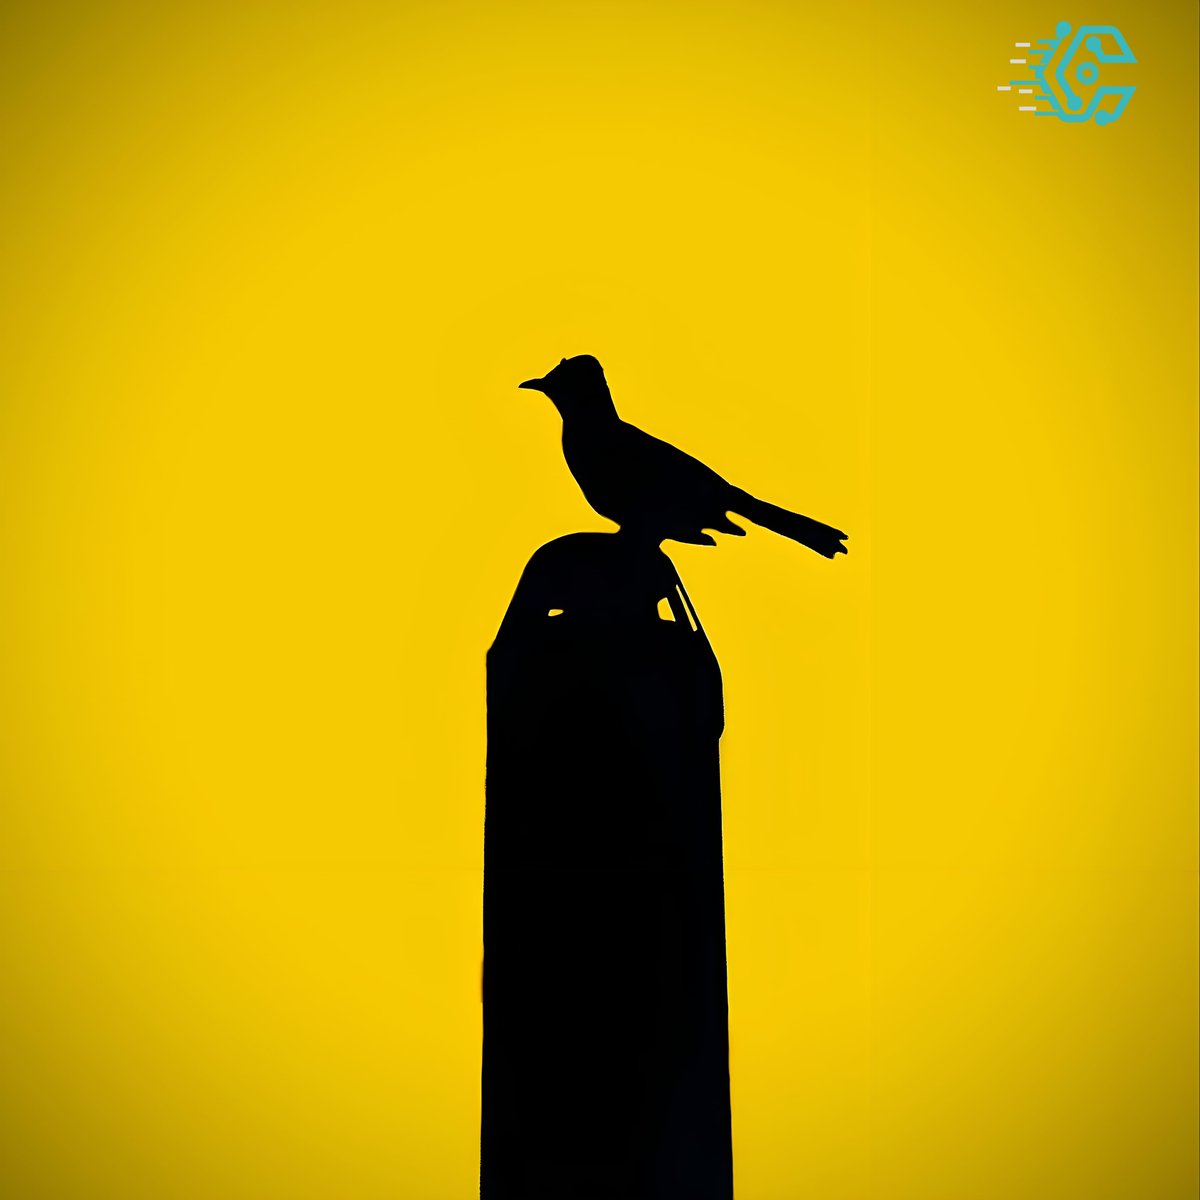 In order to see birds it is necessary to become a part of the silence.

#photography 
#birds 
#camera 
#photographer 
#photooftheday 
#birdwatching